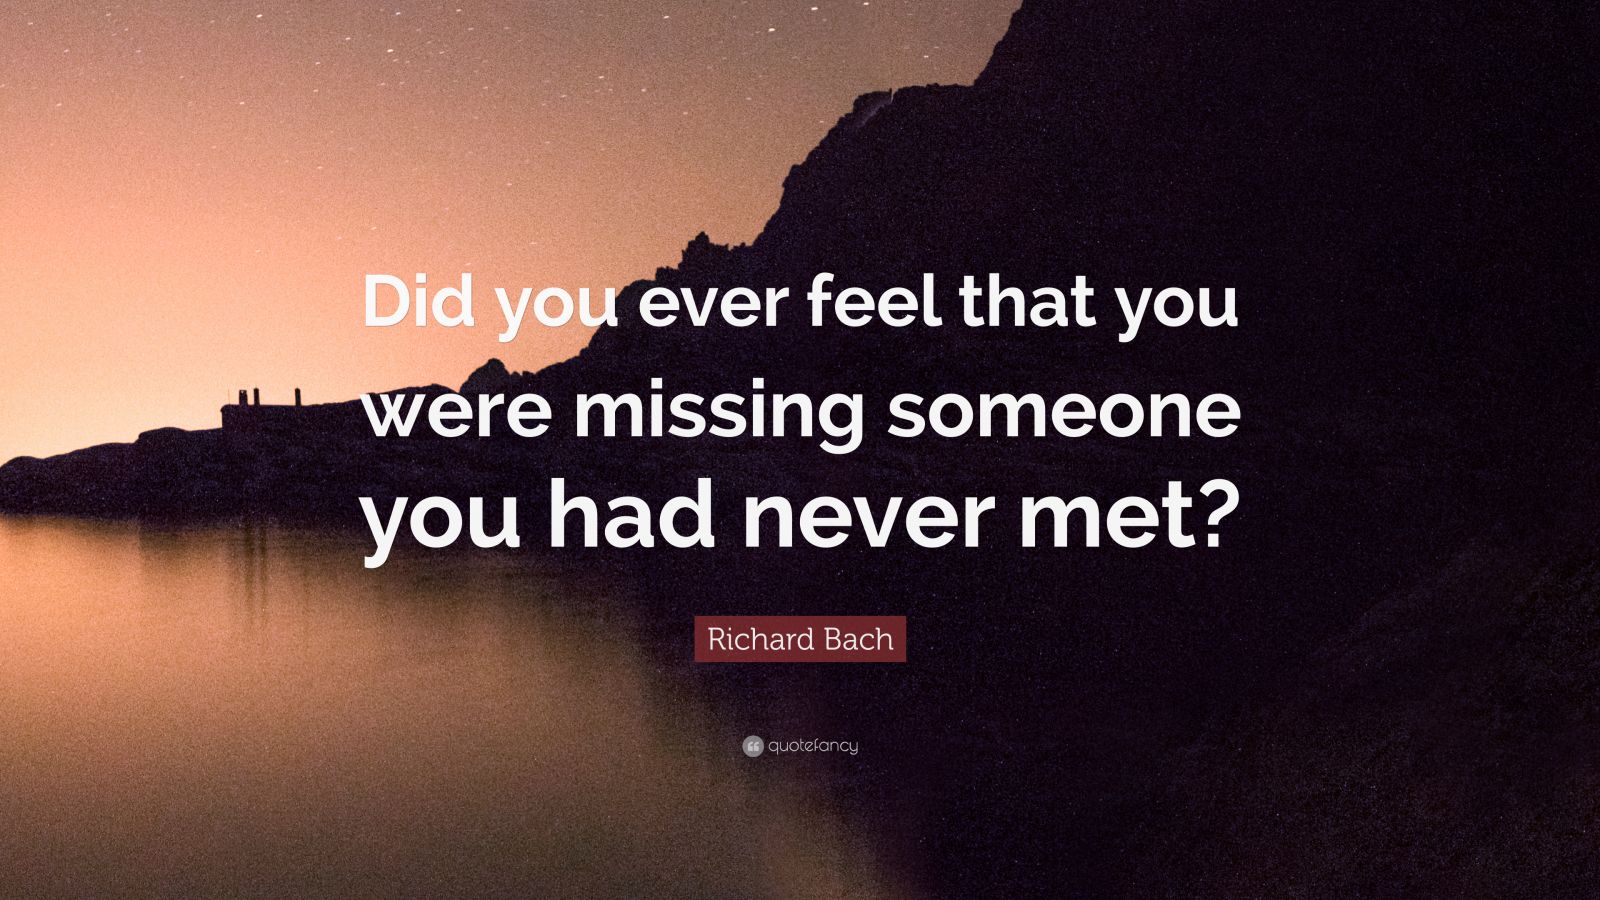 Richard Bach Quote “Did you ever feel that you were missing someone